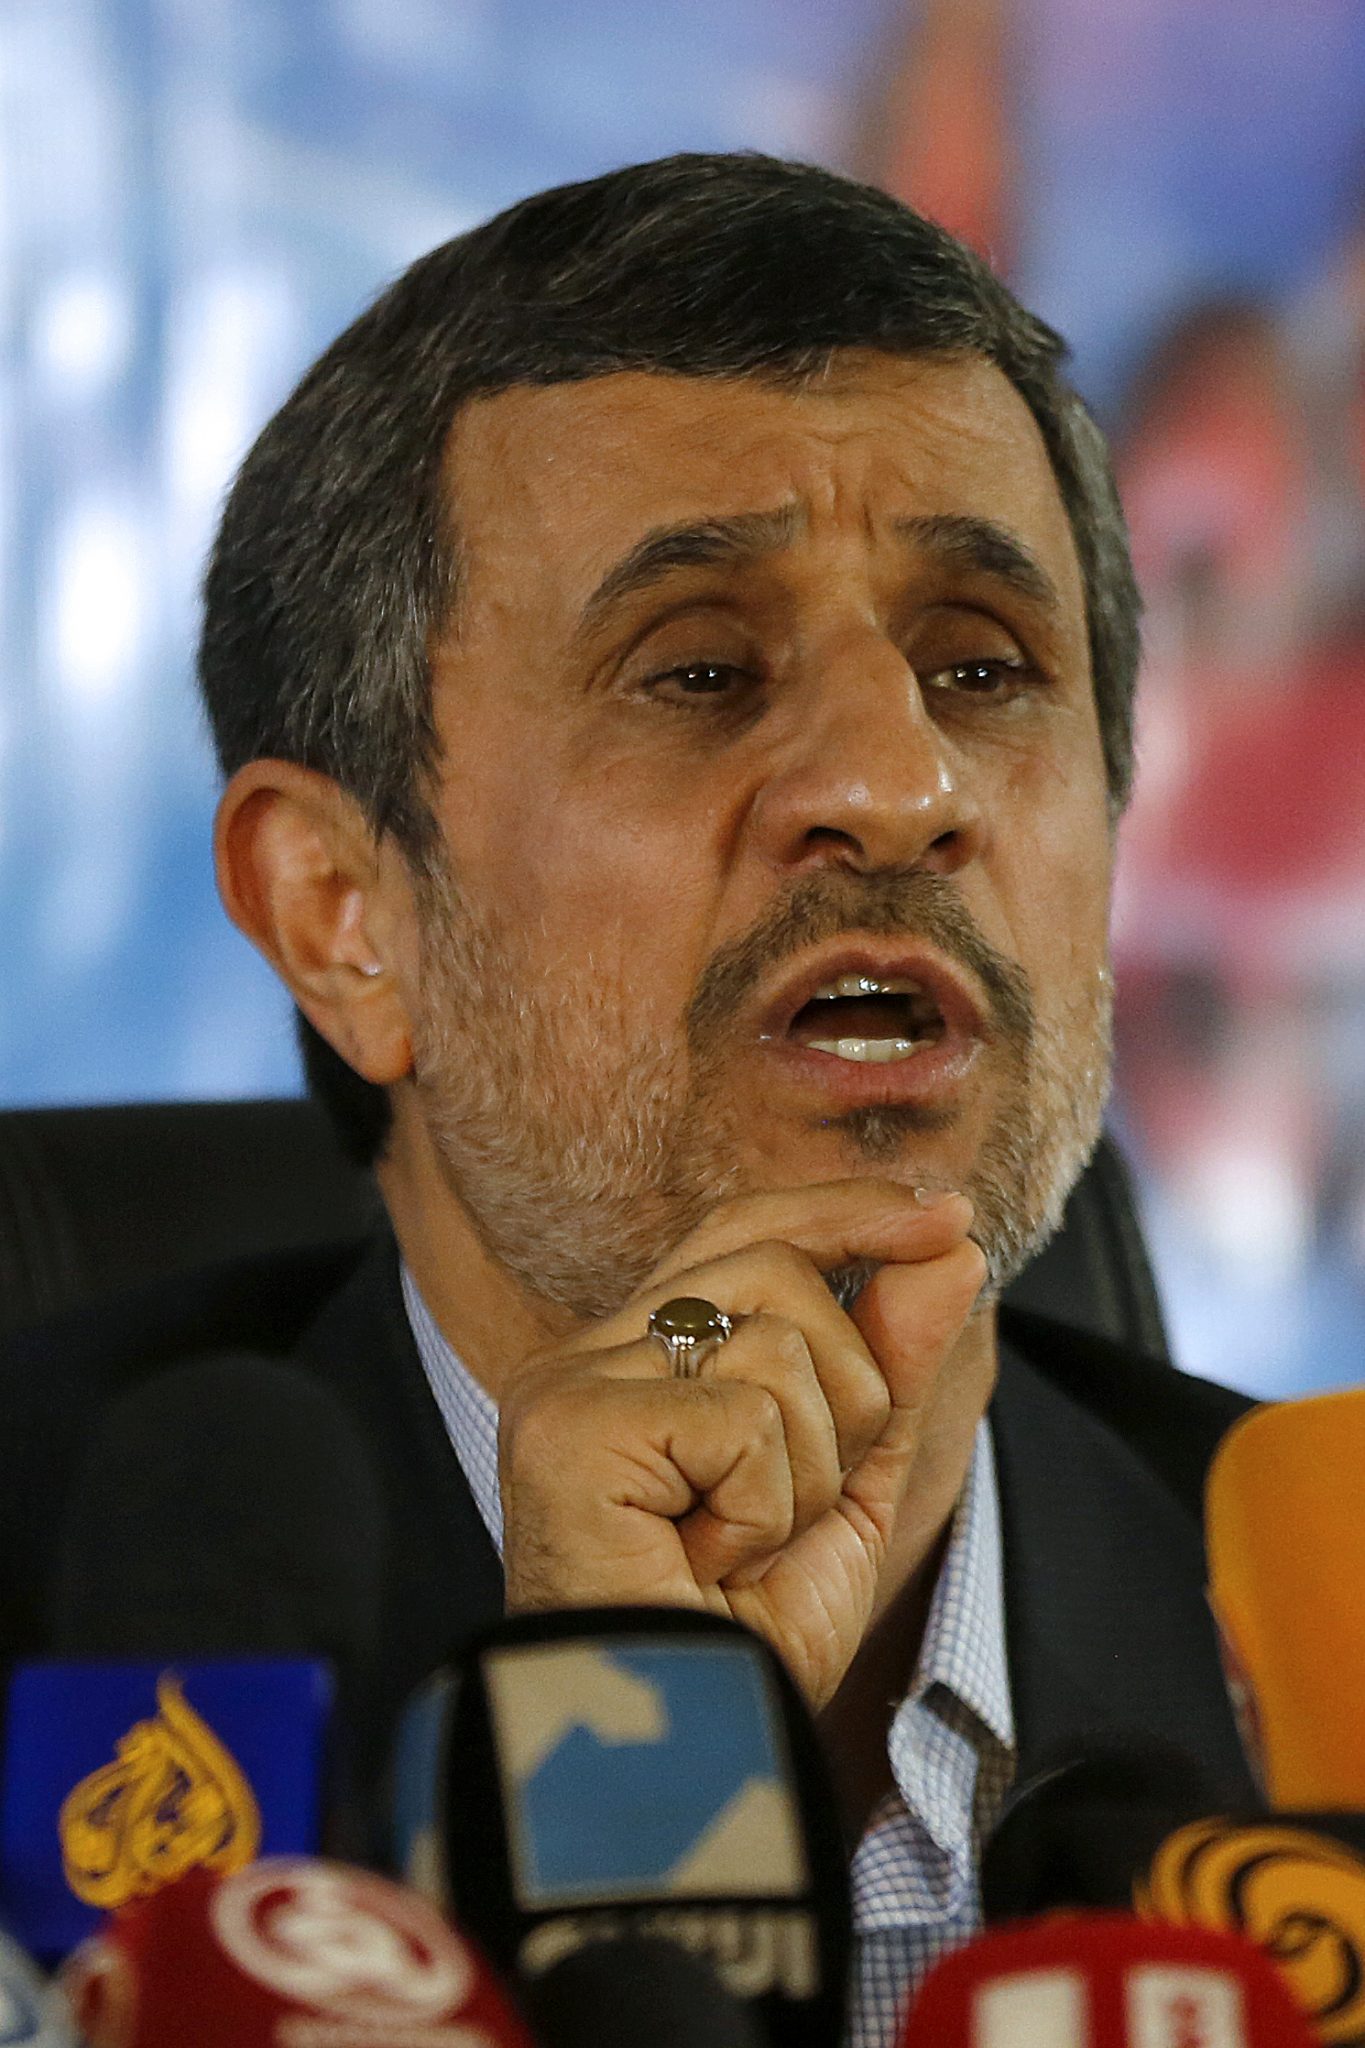 Former Iranian president Mahmoud Ahmadinejad speaks during a press conference in the capital Tehran on April 5, 2017. Former hardline Iranian president Mahmoud Ahmadinejad said he would support his former vice president, Hamid Baghaie, in May's presidential election. / AFP PHOTO / ATTA KENARE